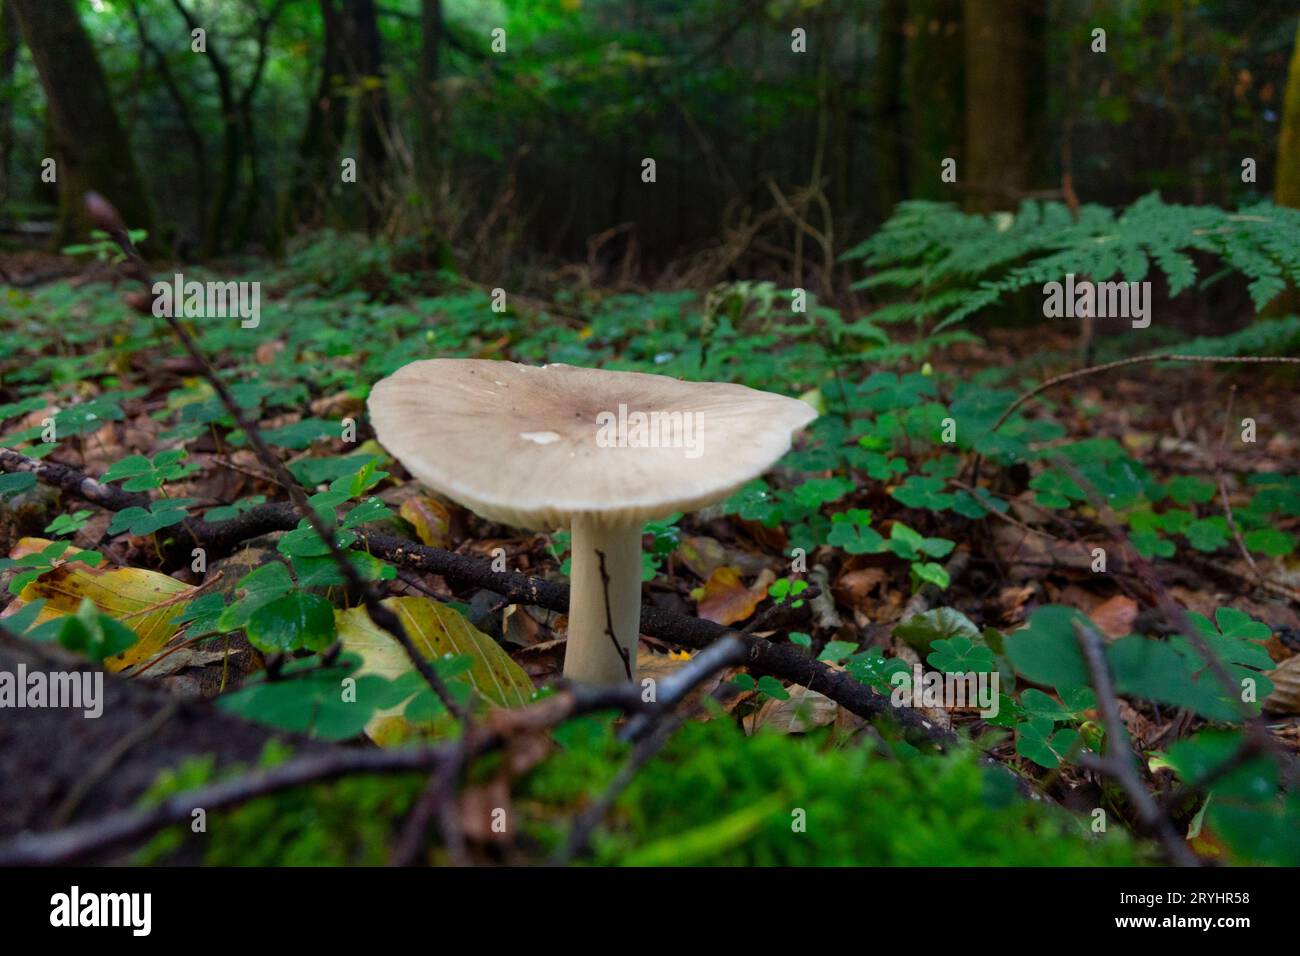 A forest mushroom growing among fallen leaves in the woods Stock Photo